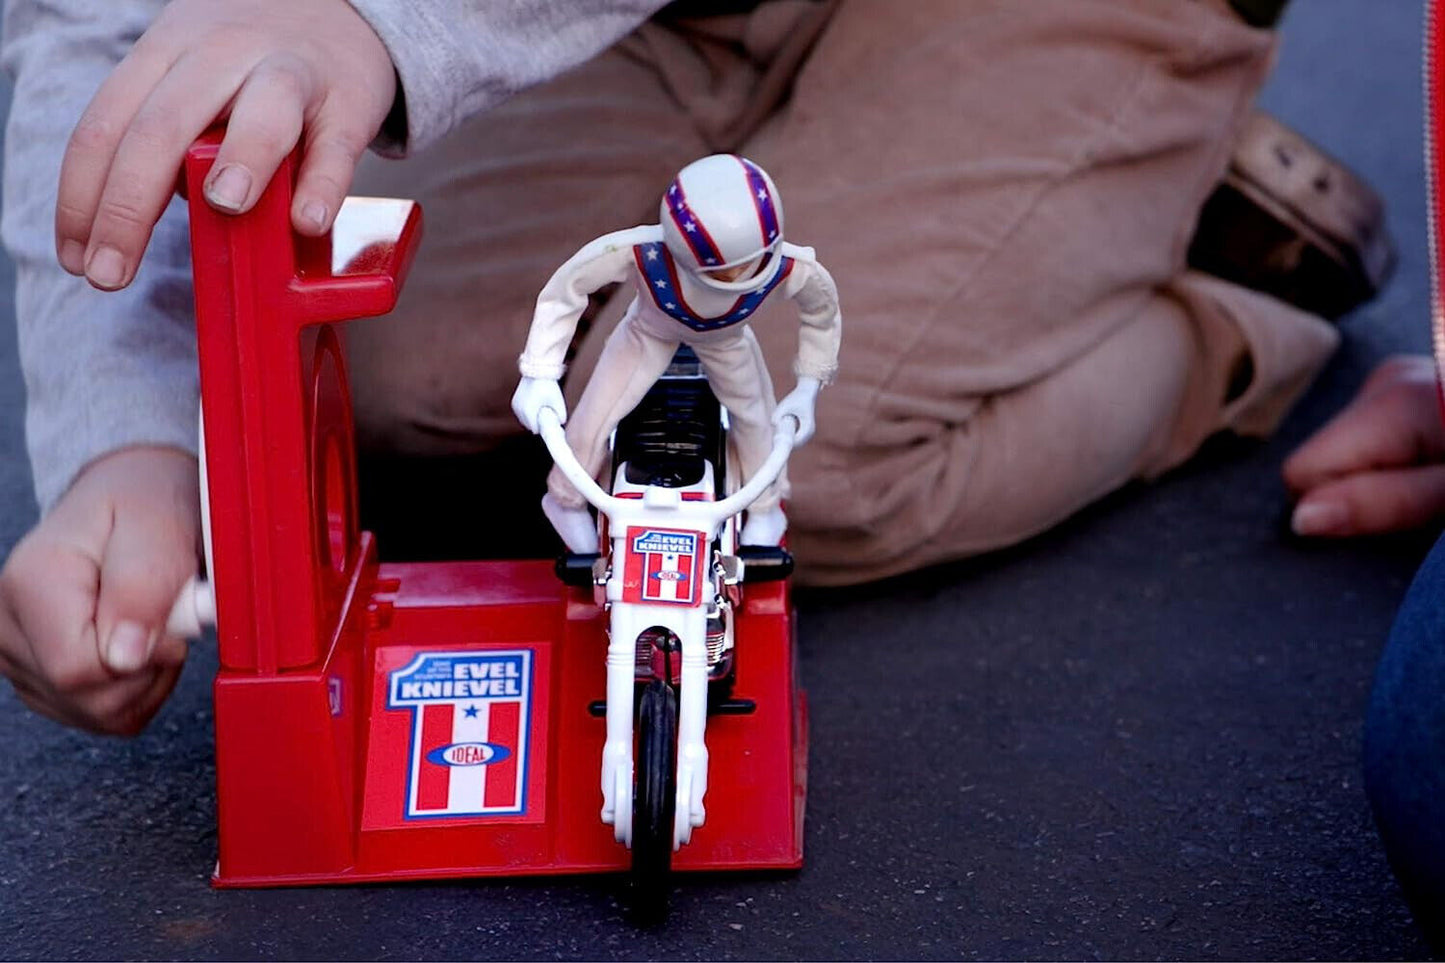 Evel Knievel Stunt Cycle Toy-Wind Up Energizer Launcher